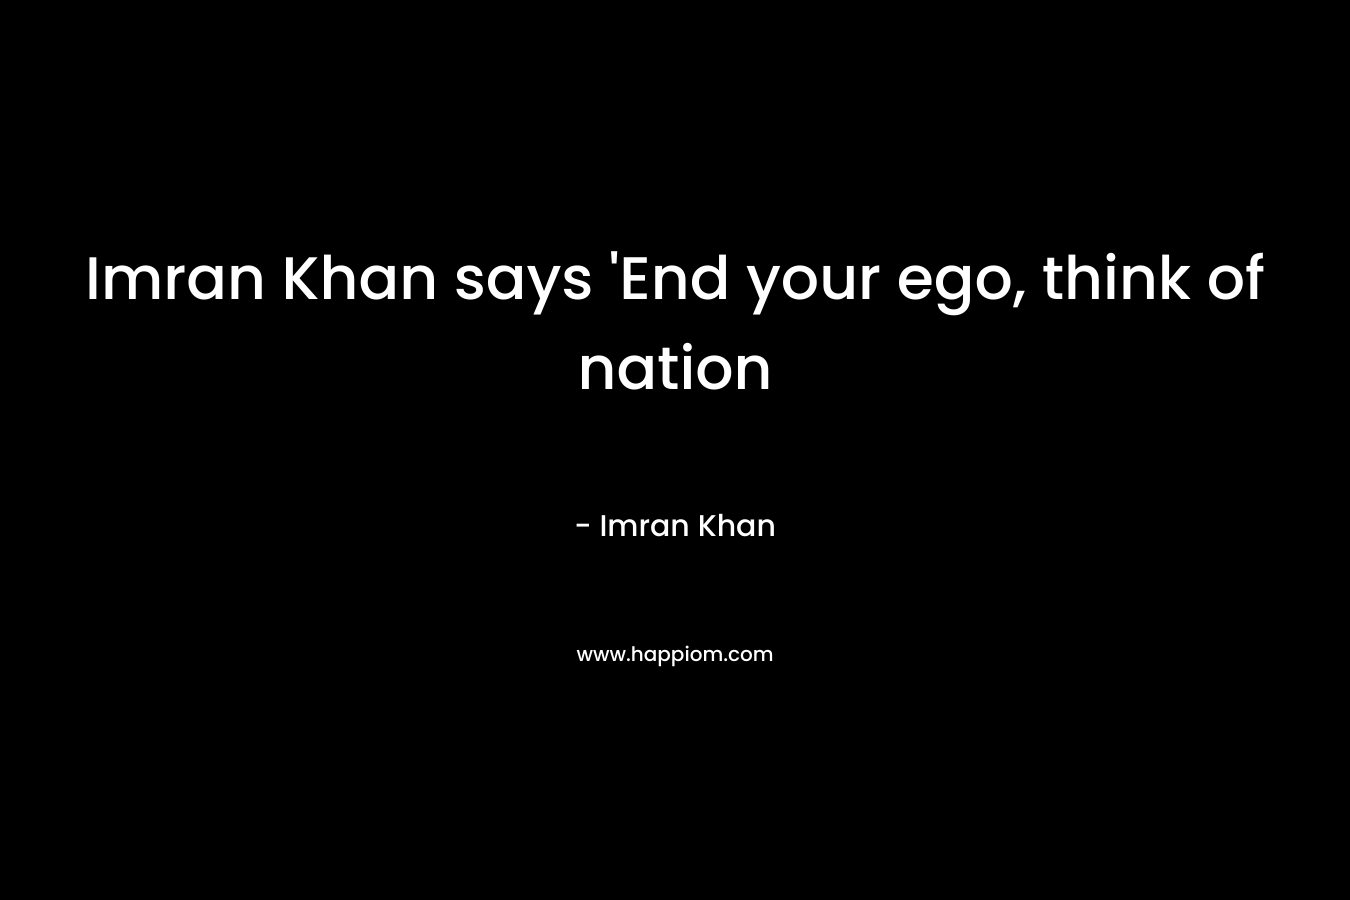 Imran Khan says 'End your ego, think of nation